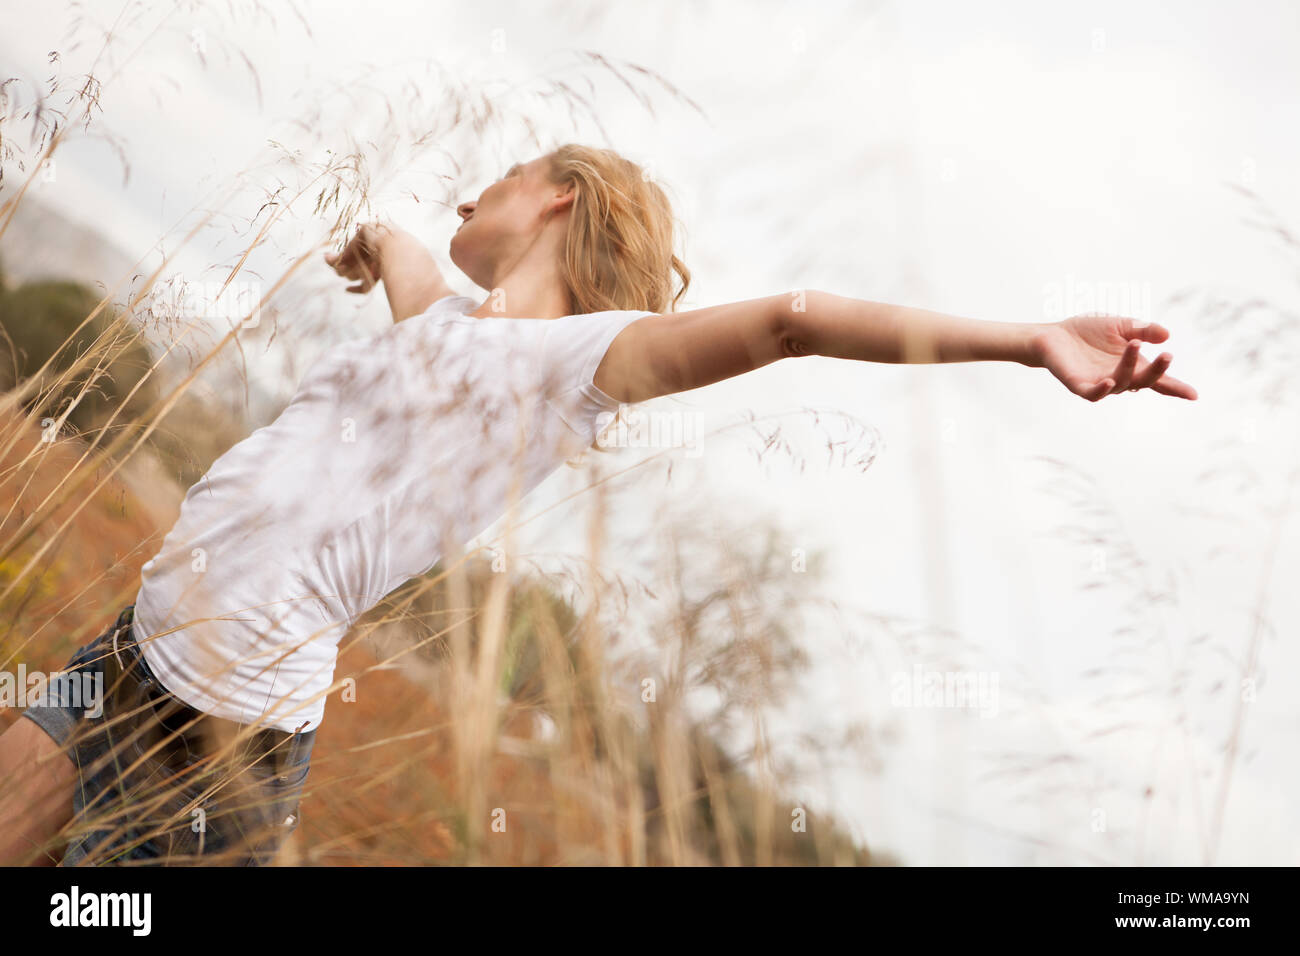 Arms wide open woman Cut Out Stock Images & Pictures - Alamy